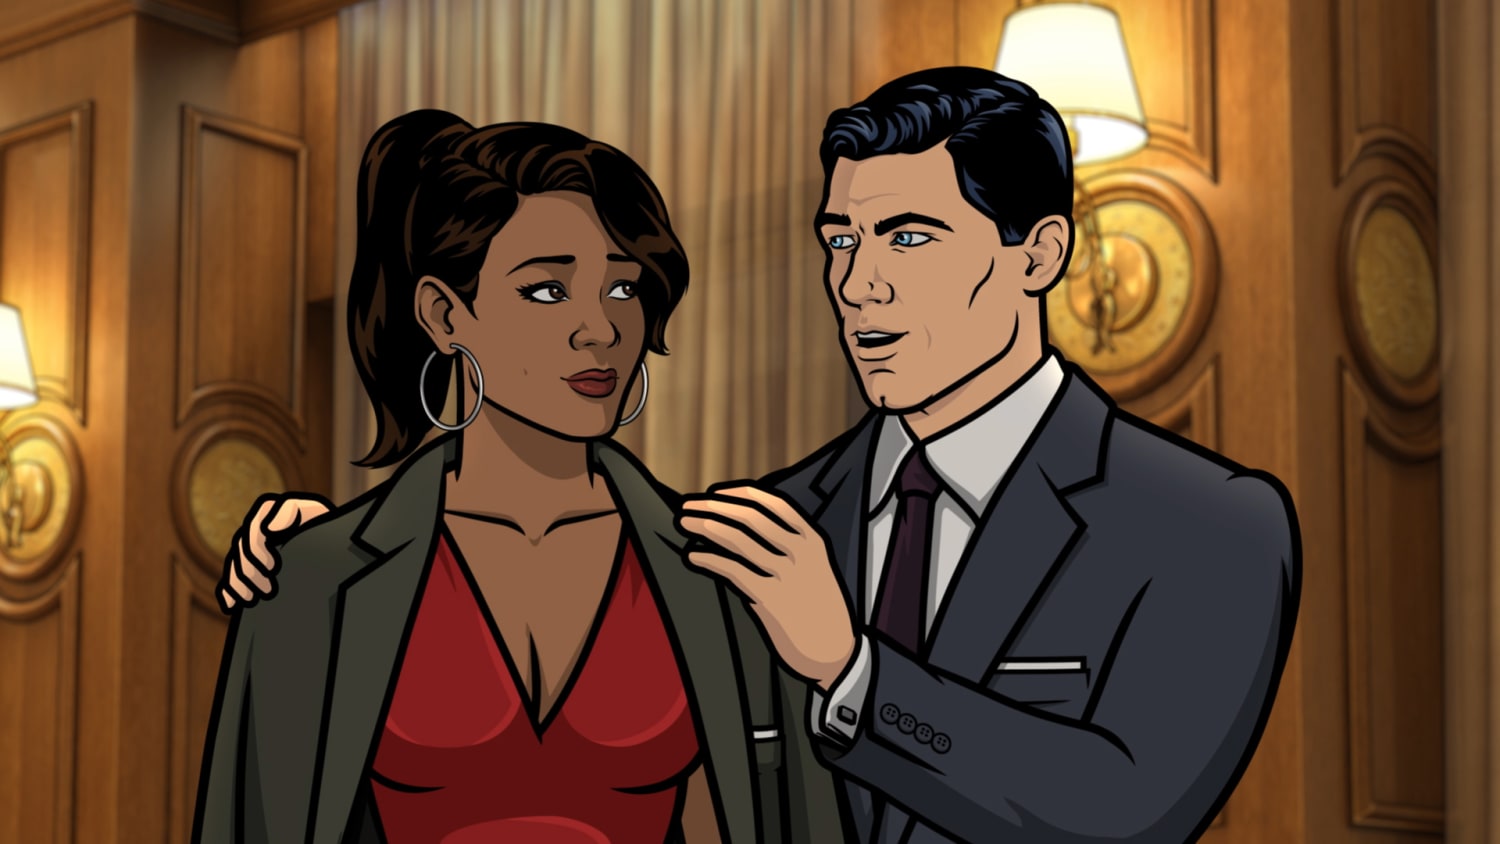 The 'Archer' Season 11 finale should've been its last. But we needed more  of its valiant comedy.